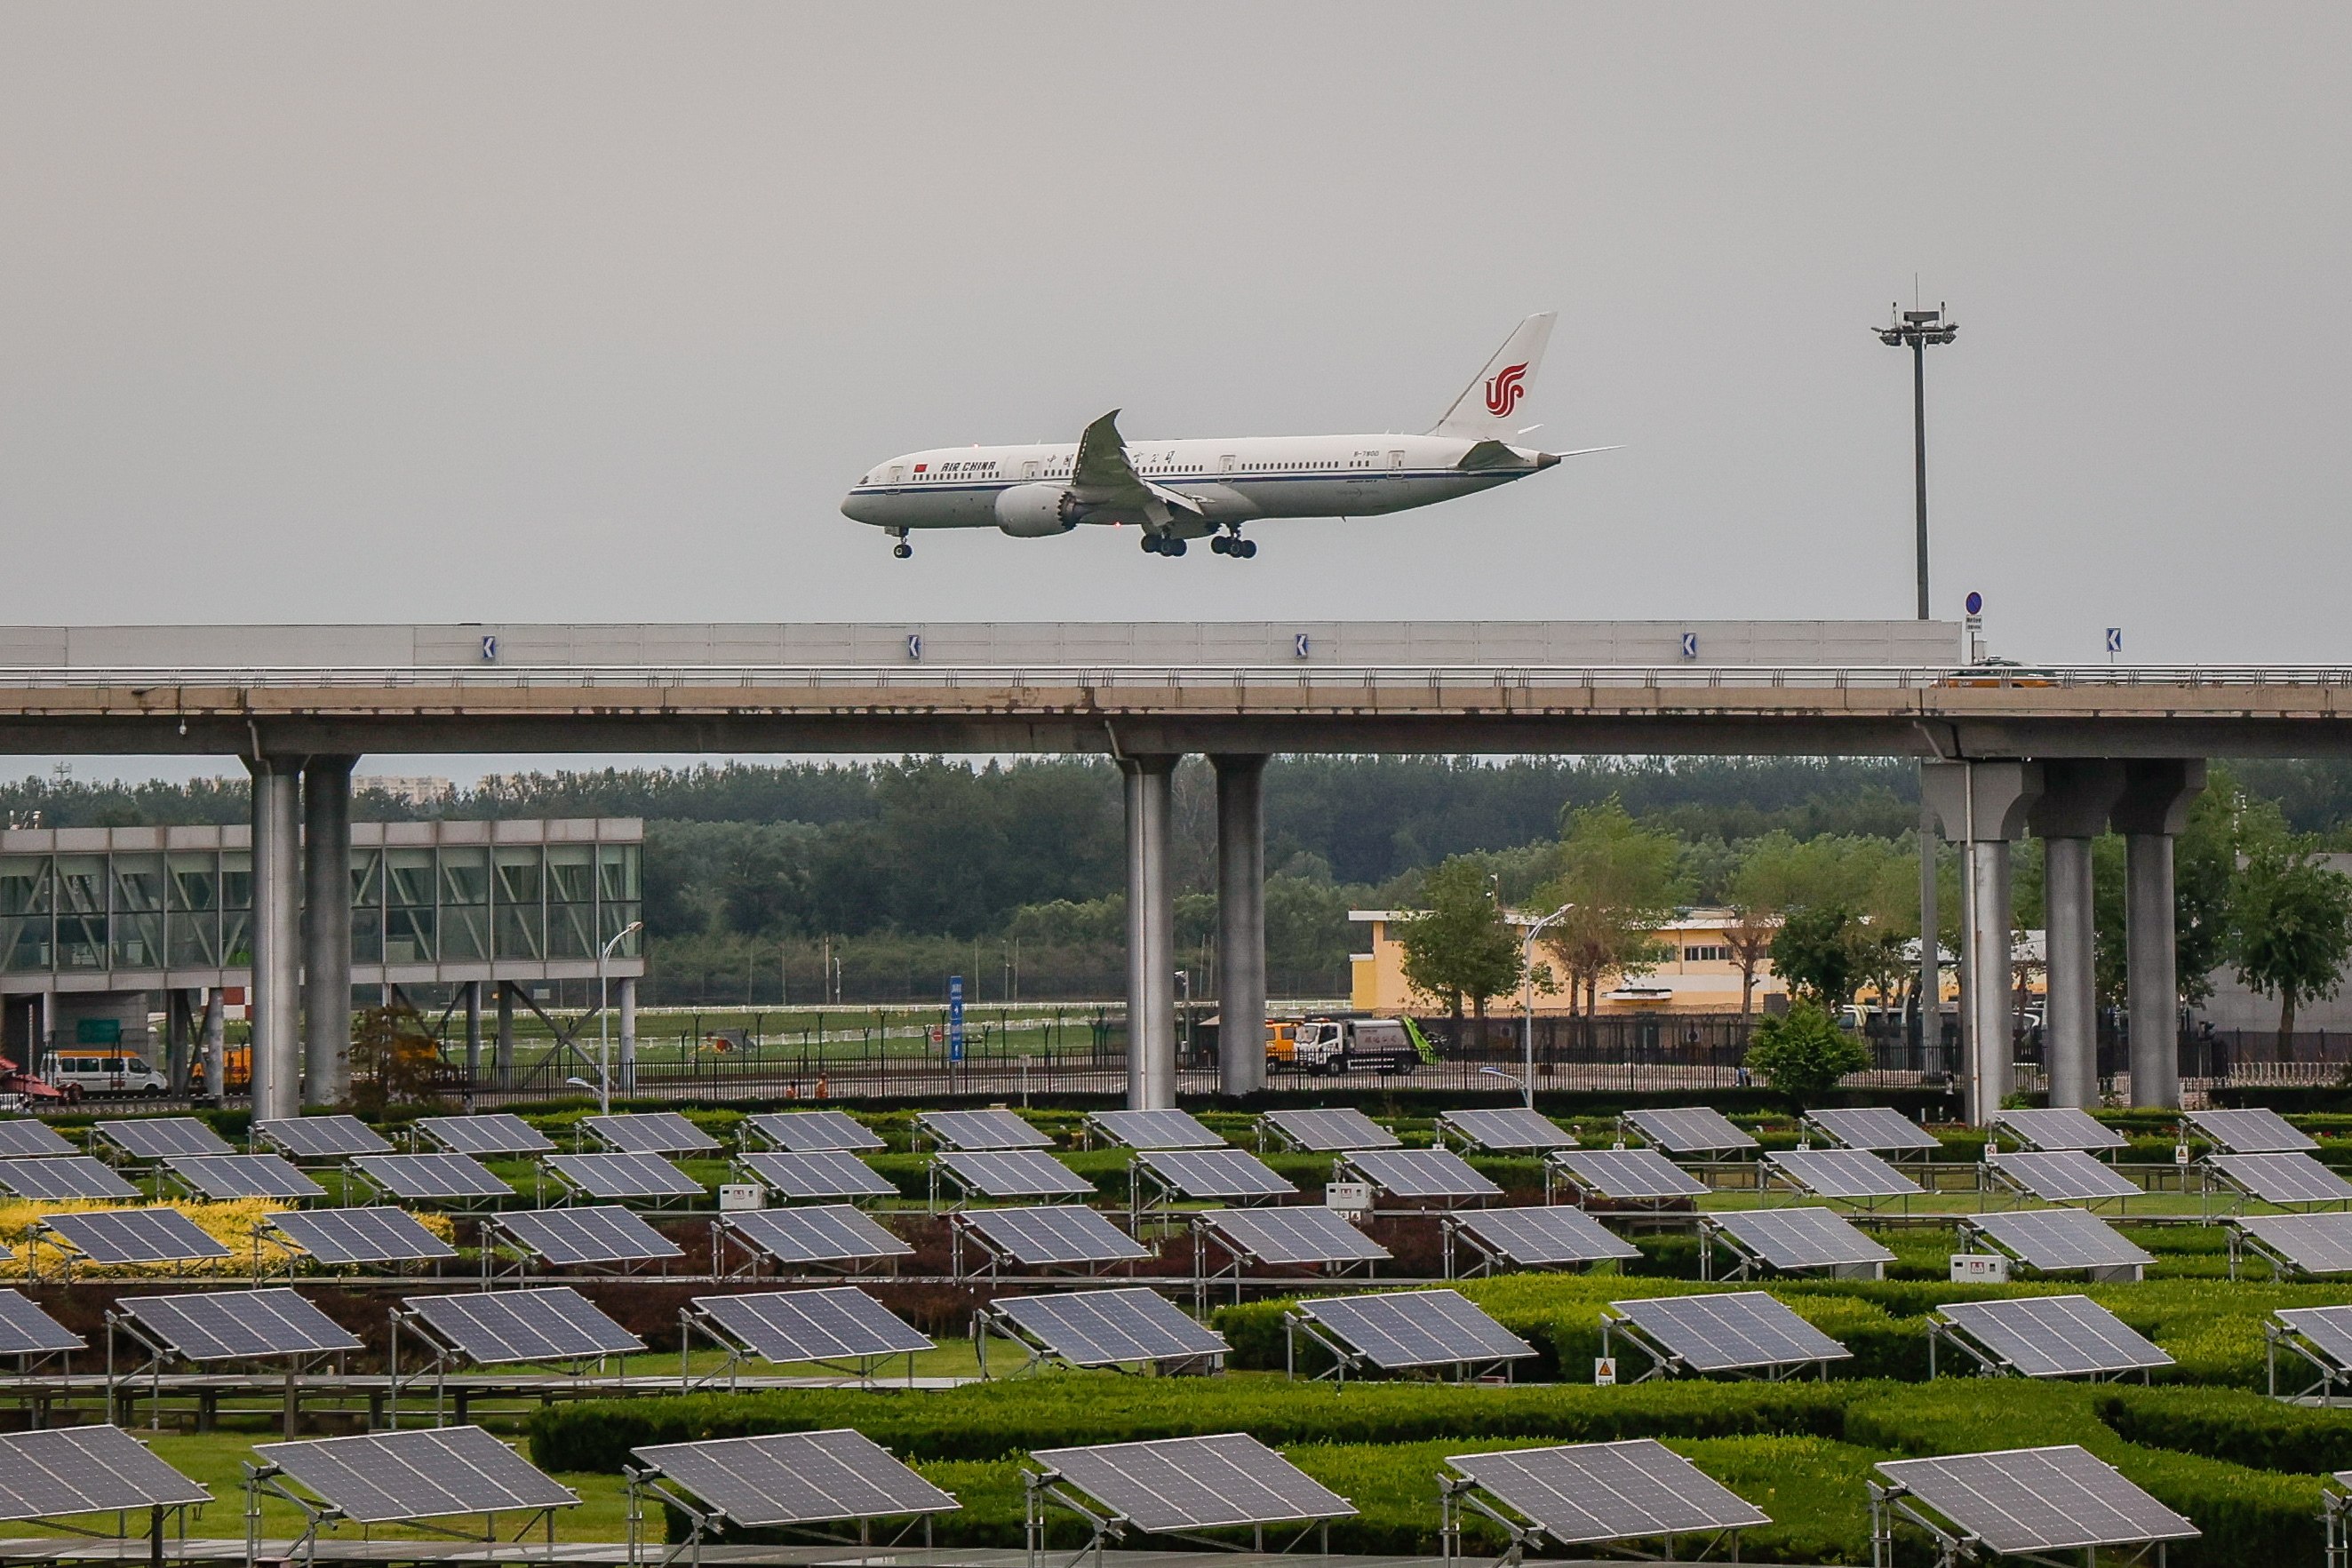 An Air China plane lands at Beijing Capital International Airport on June 29, 2022. Flights between the US and China are scheduled to increase in October per an agreement between the two countries. Photo: EPA-EFE